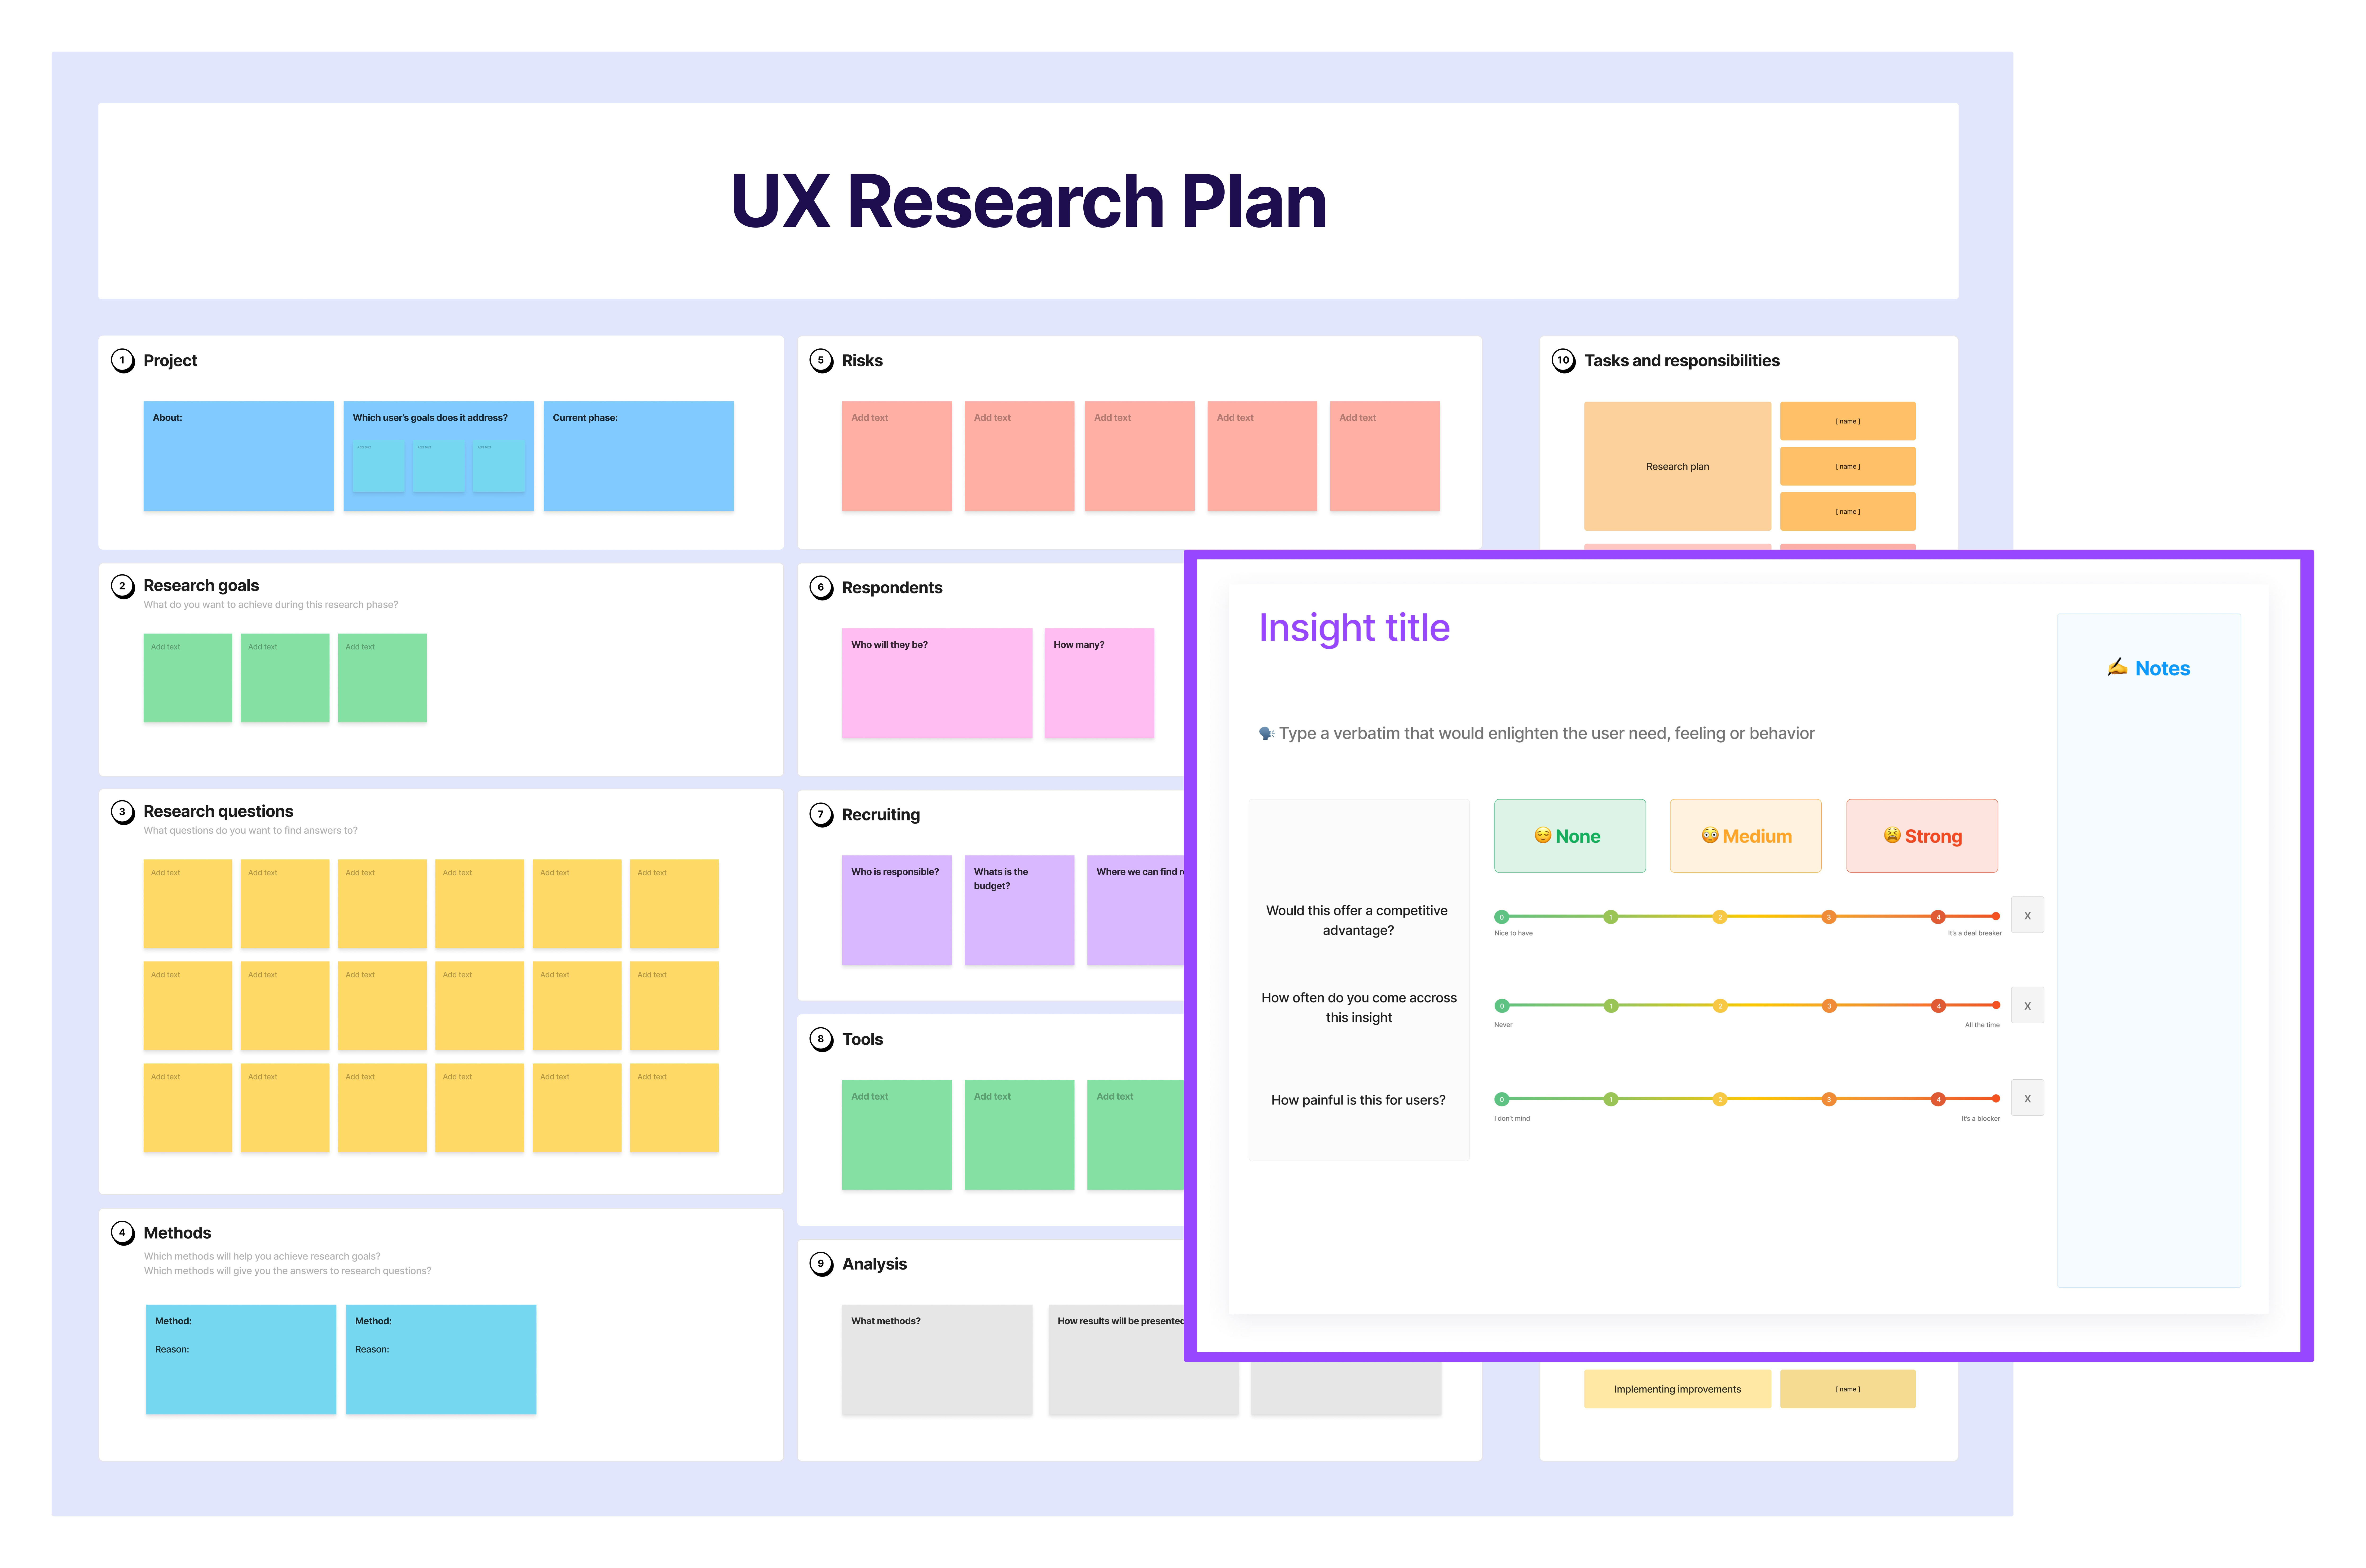 Image of a whiteboard showing the UX research process